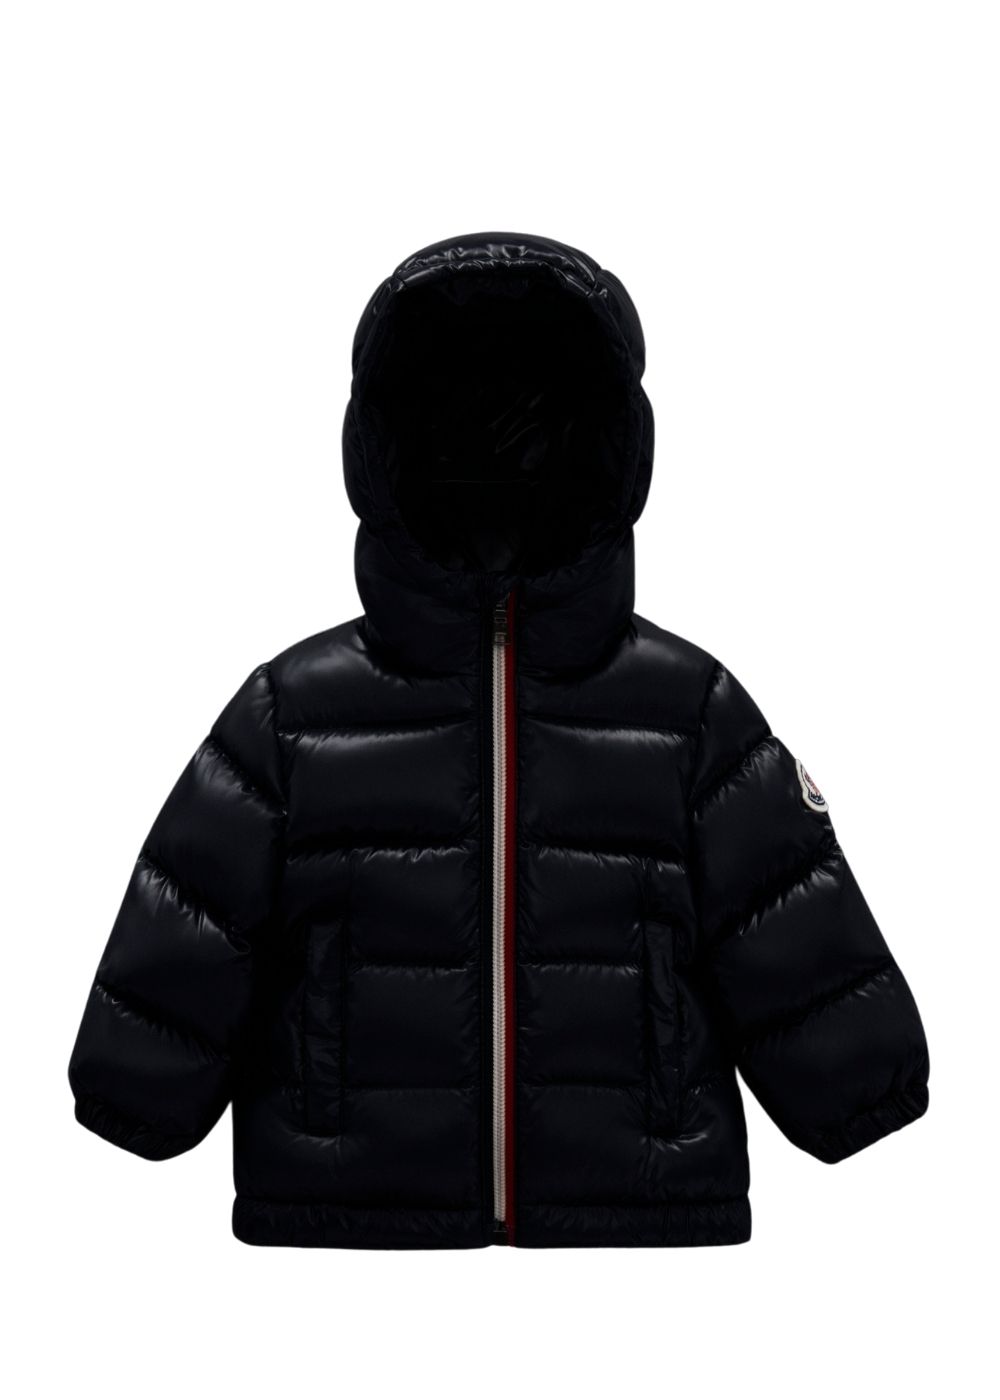 Featured image for “Moncler New Aubert”